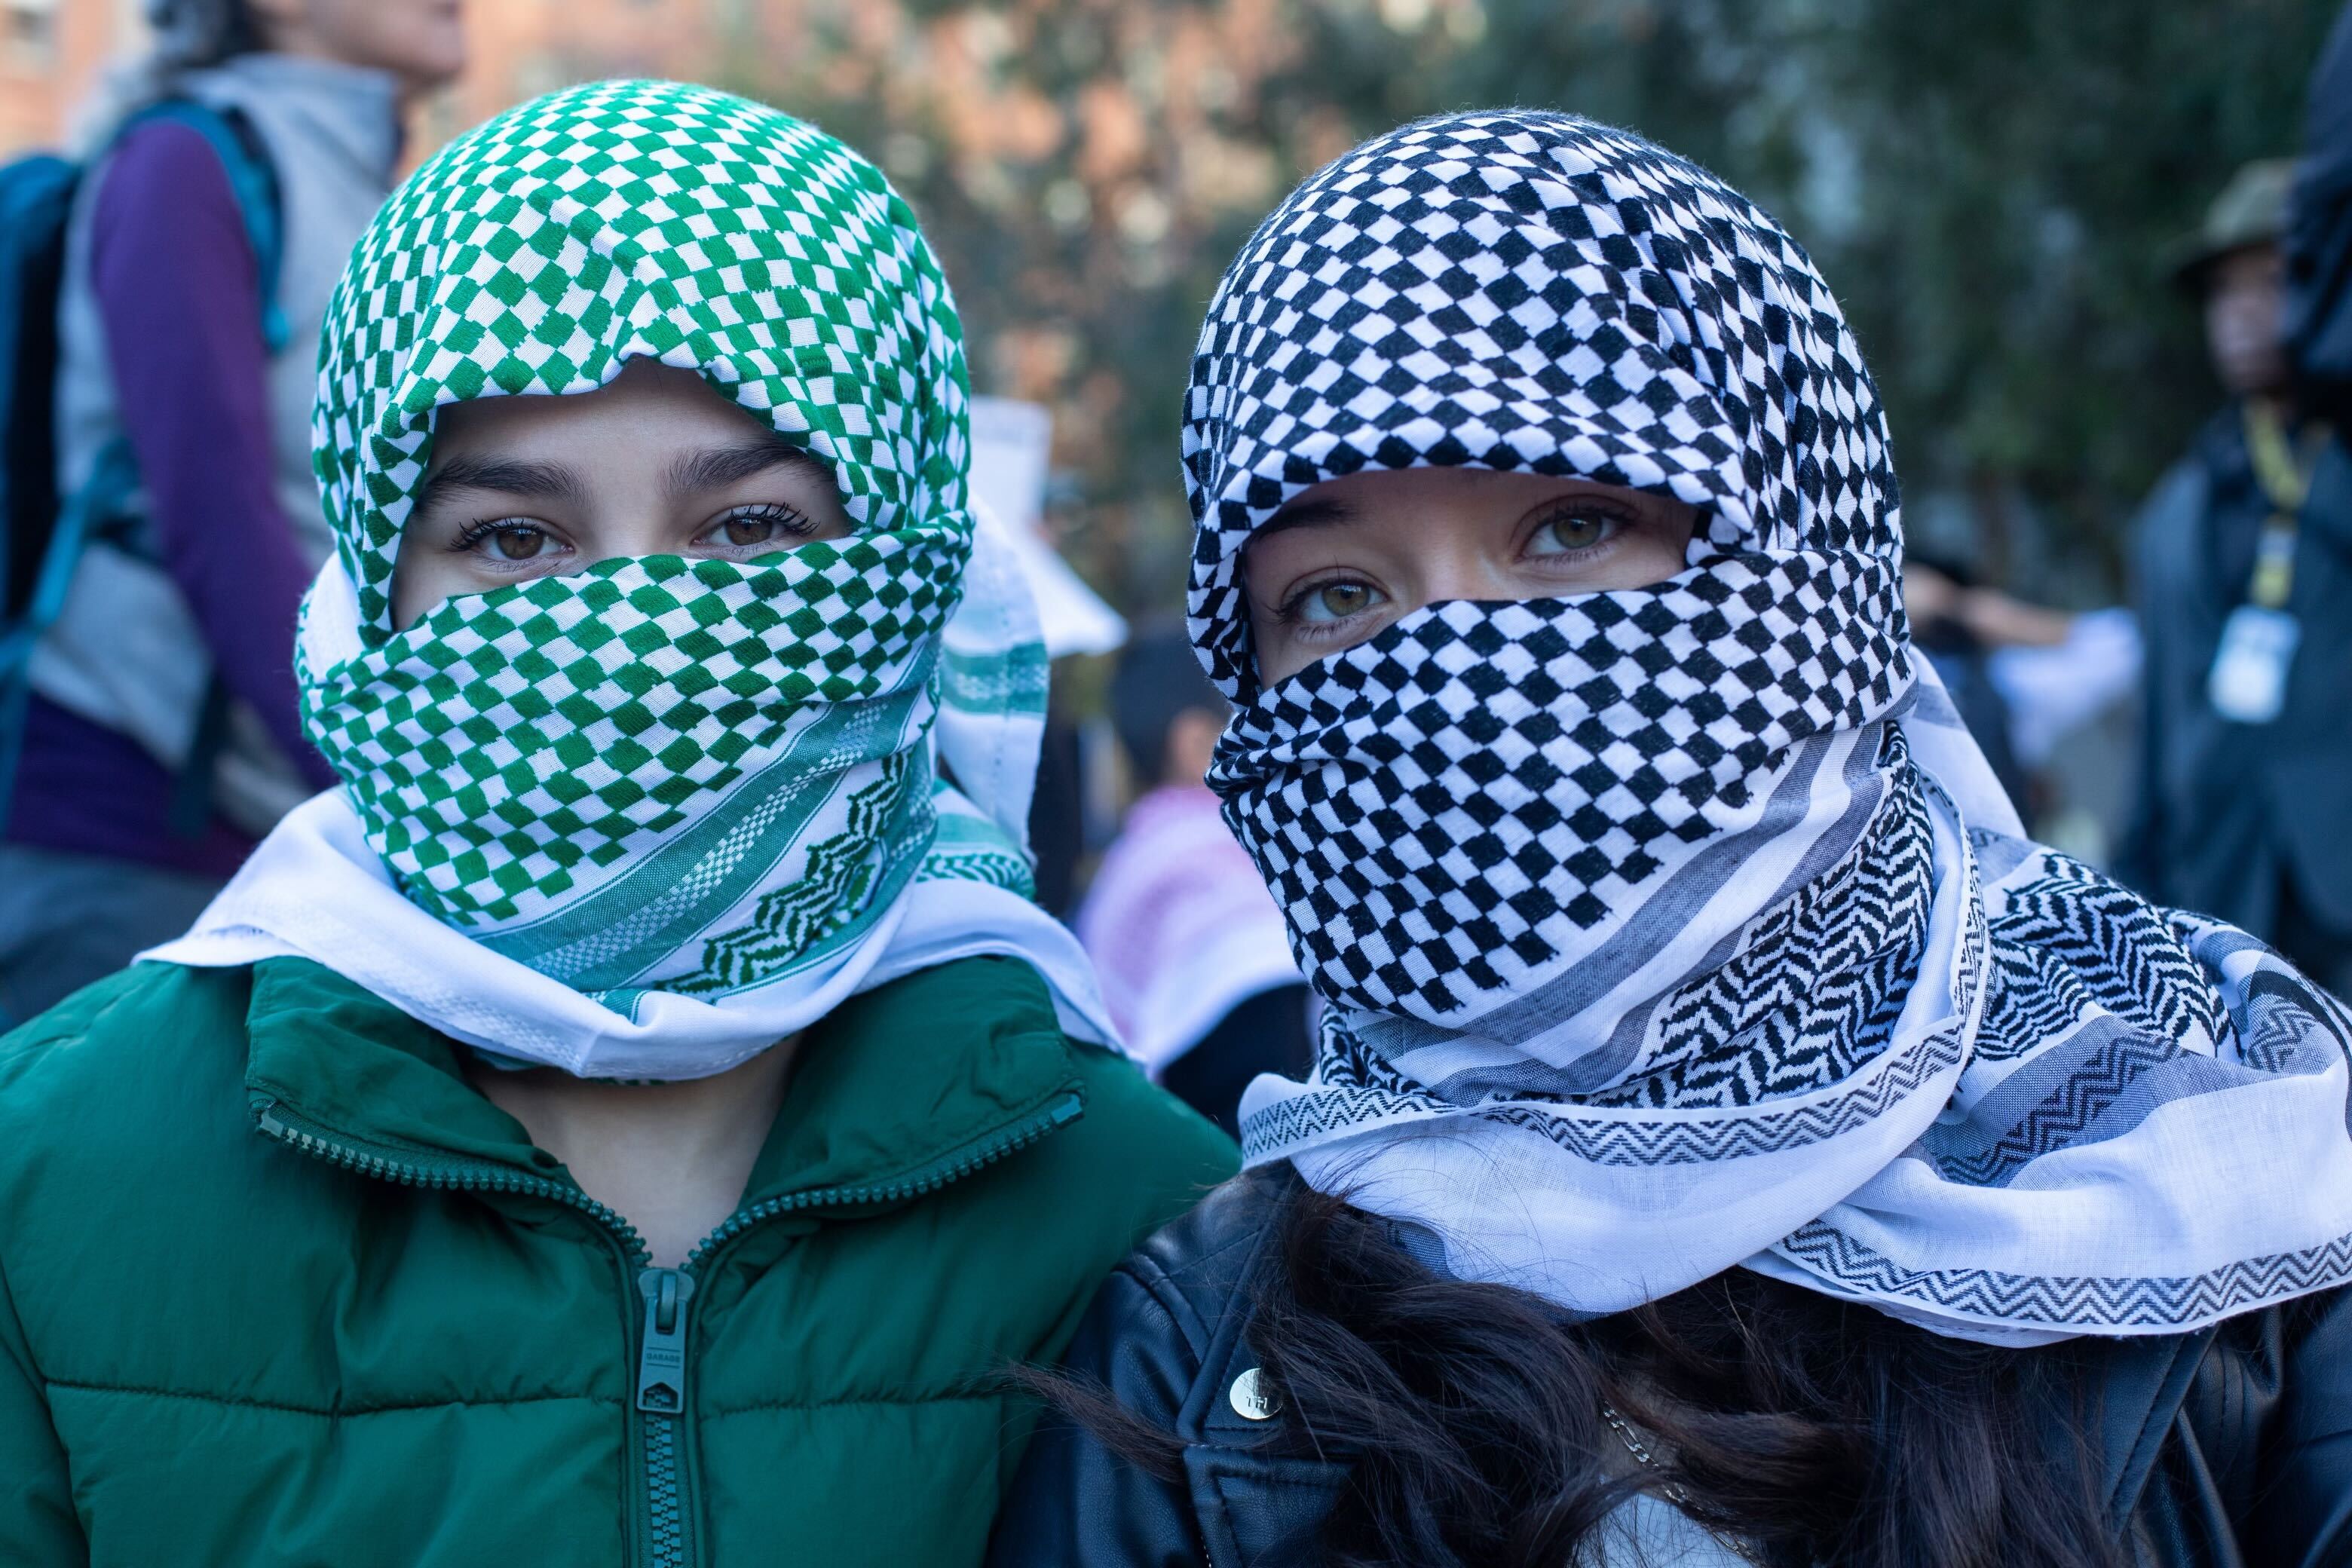 Two women wearing keffiyeh scarves look at a photographer taking a photo of them.